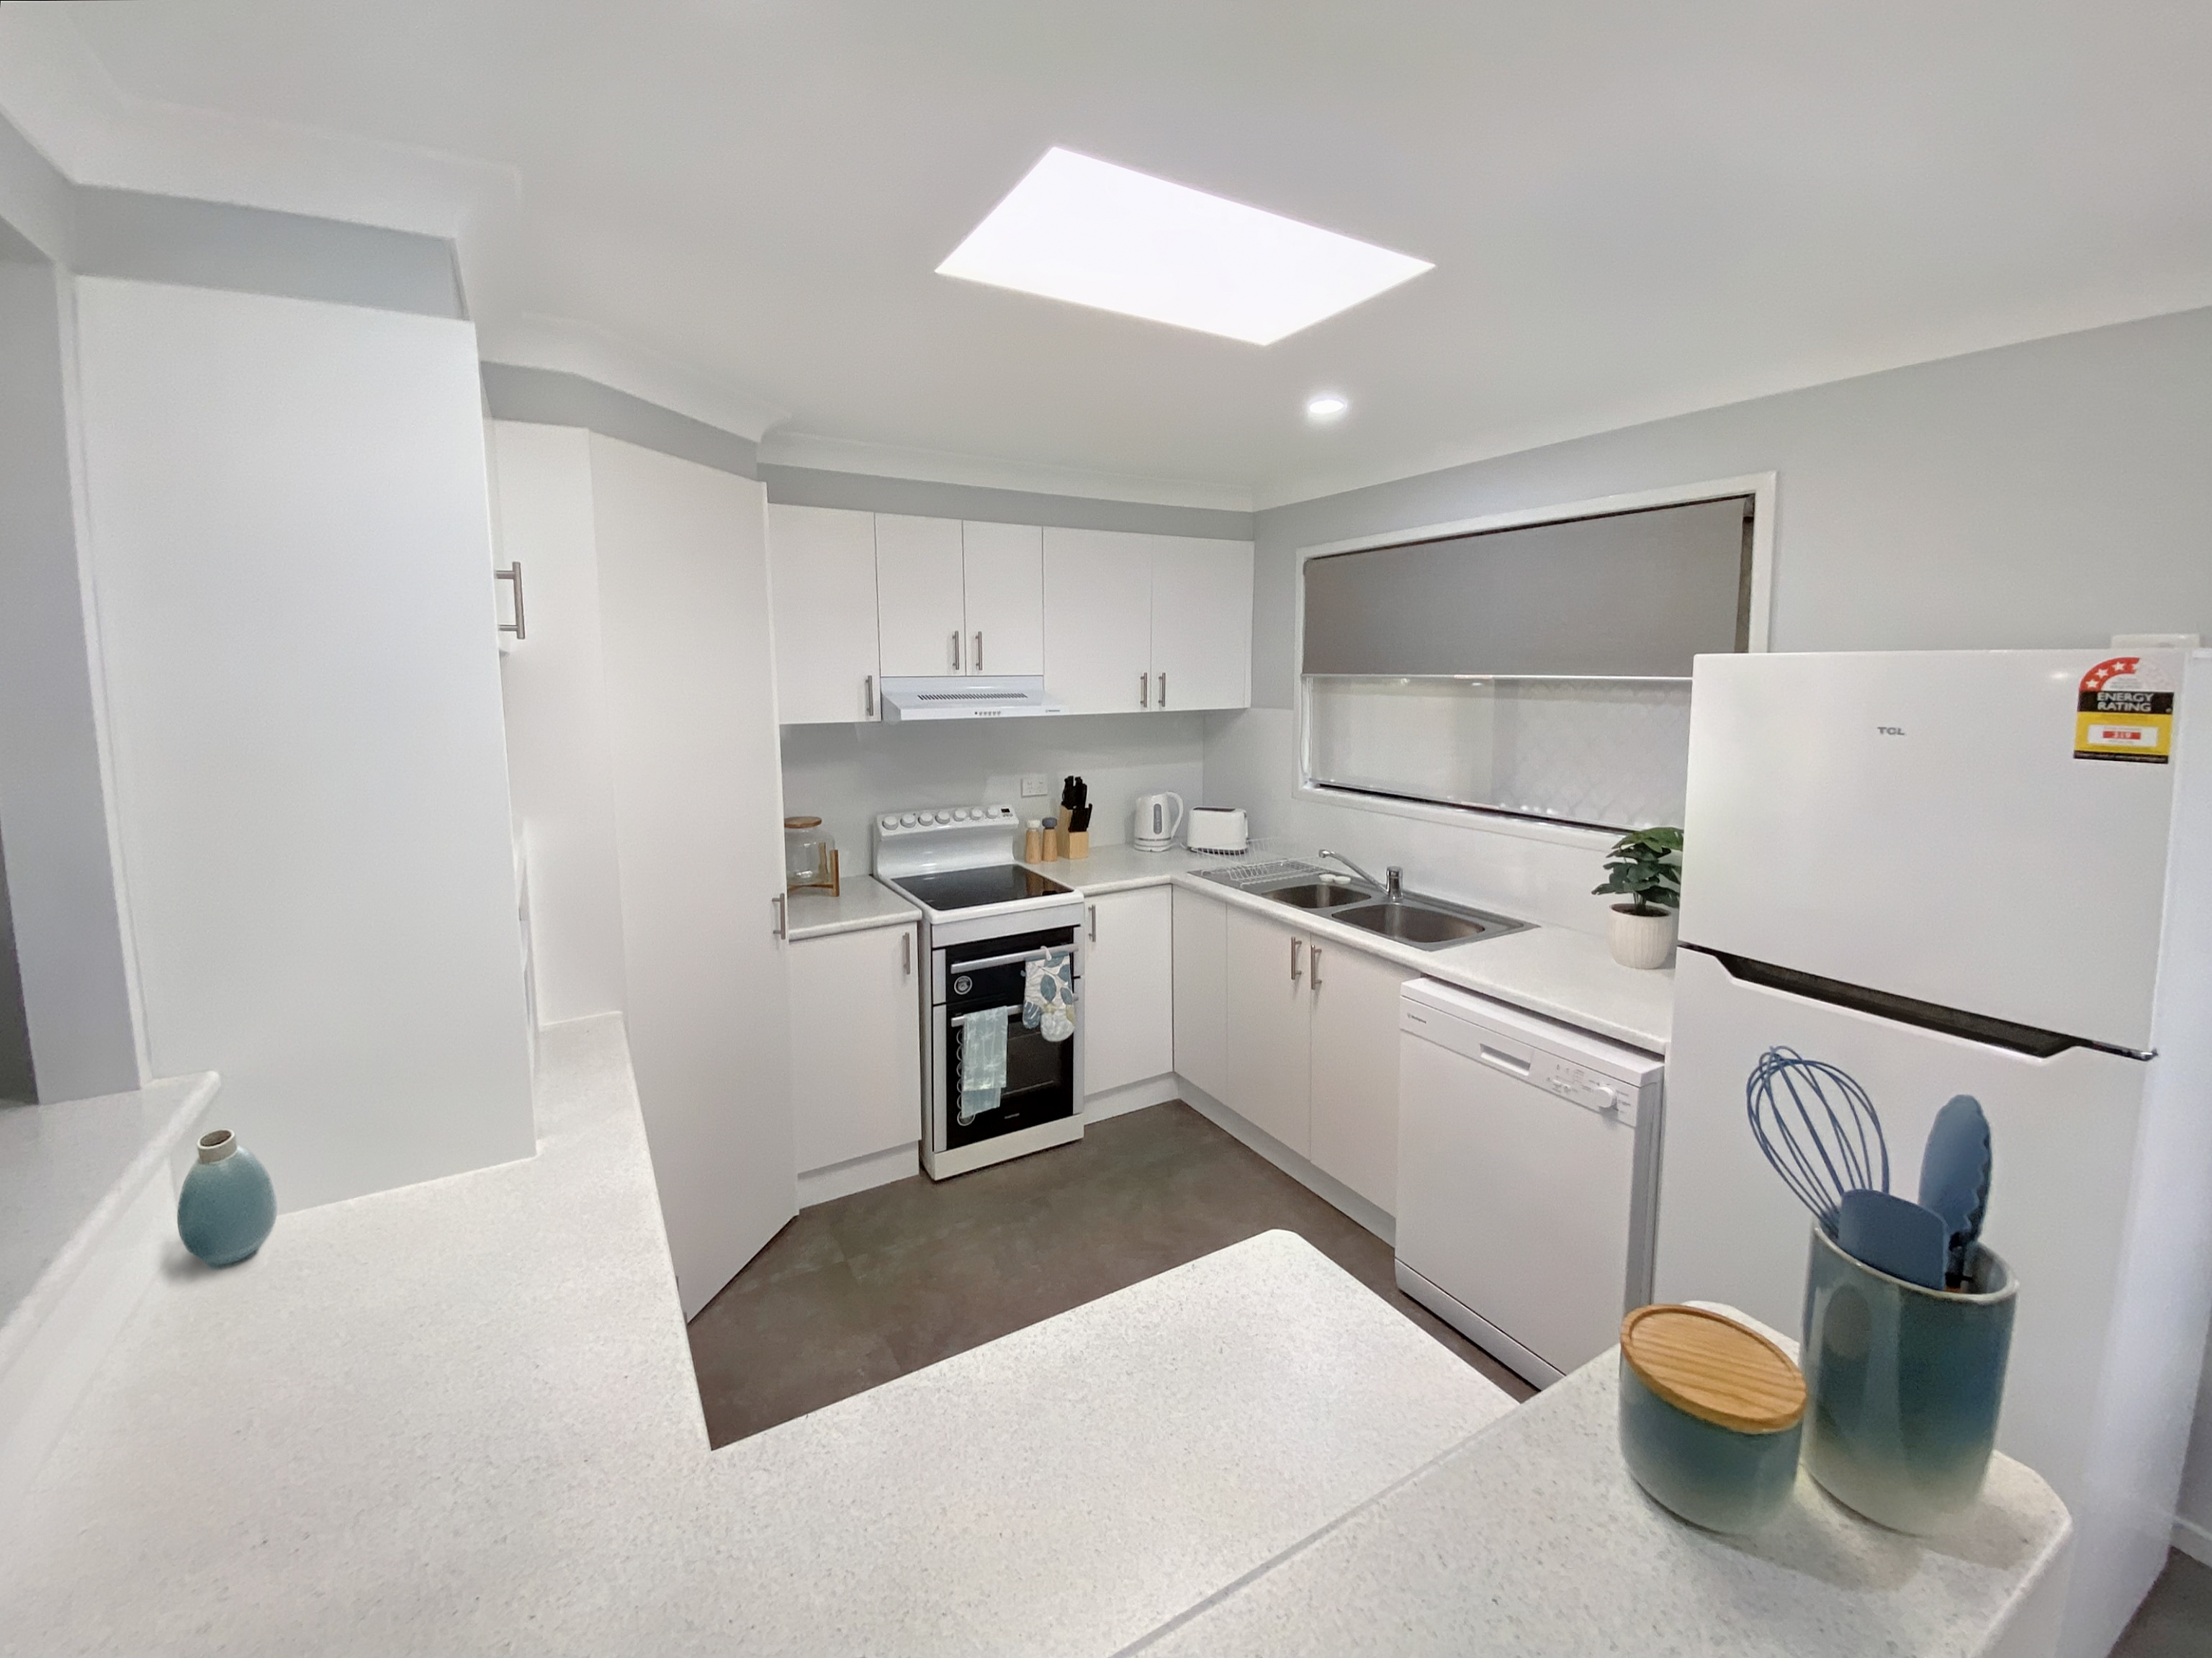 Kitchen with white table tops and cabinets, a skylight, electric oven, dishwasher and fridge. 